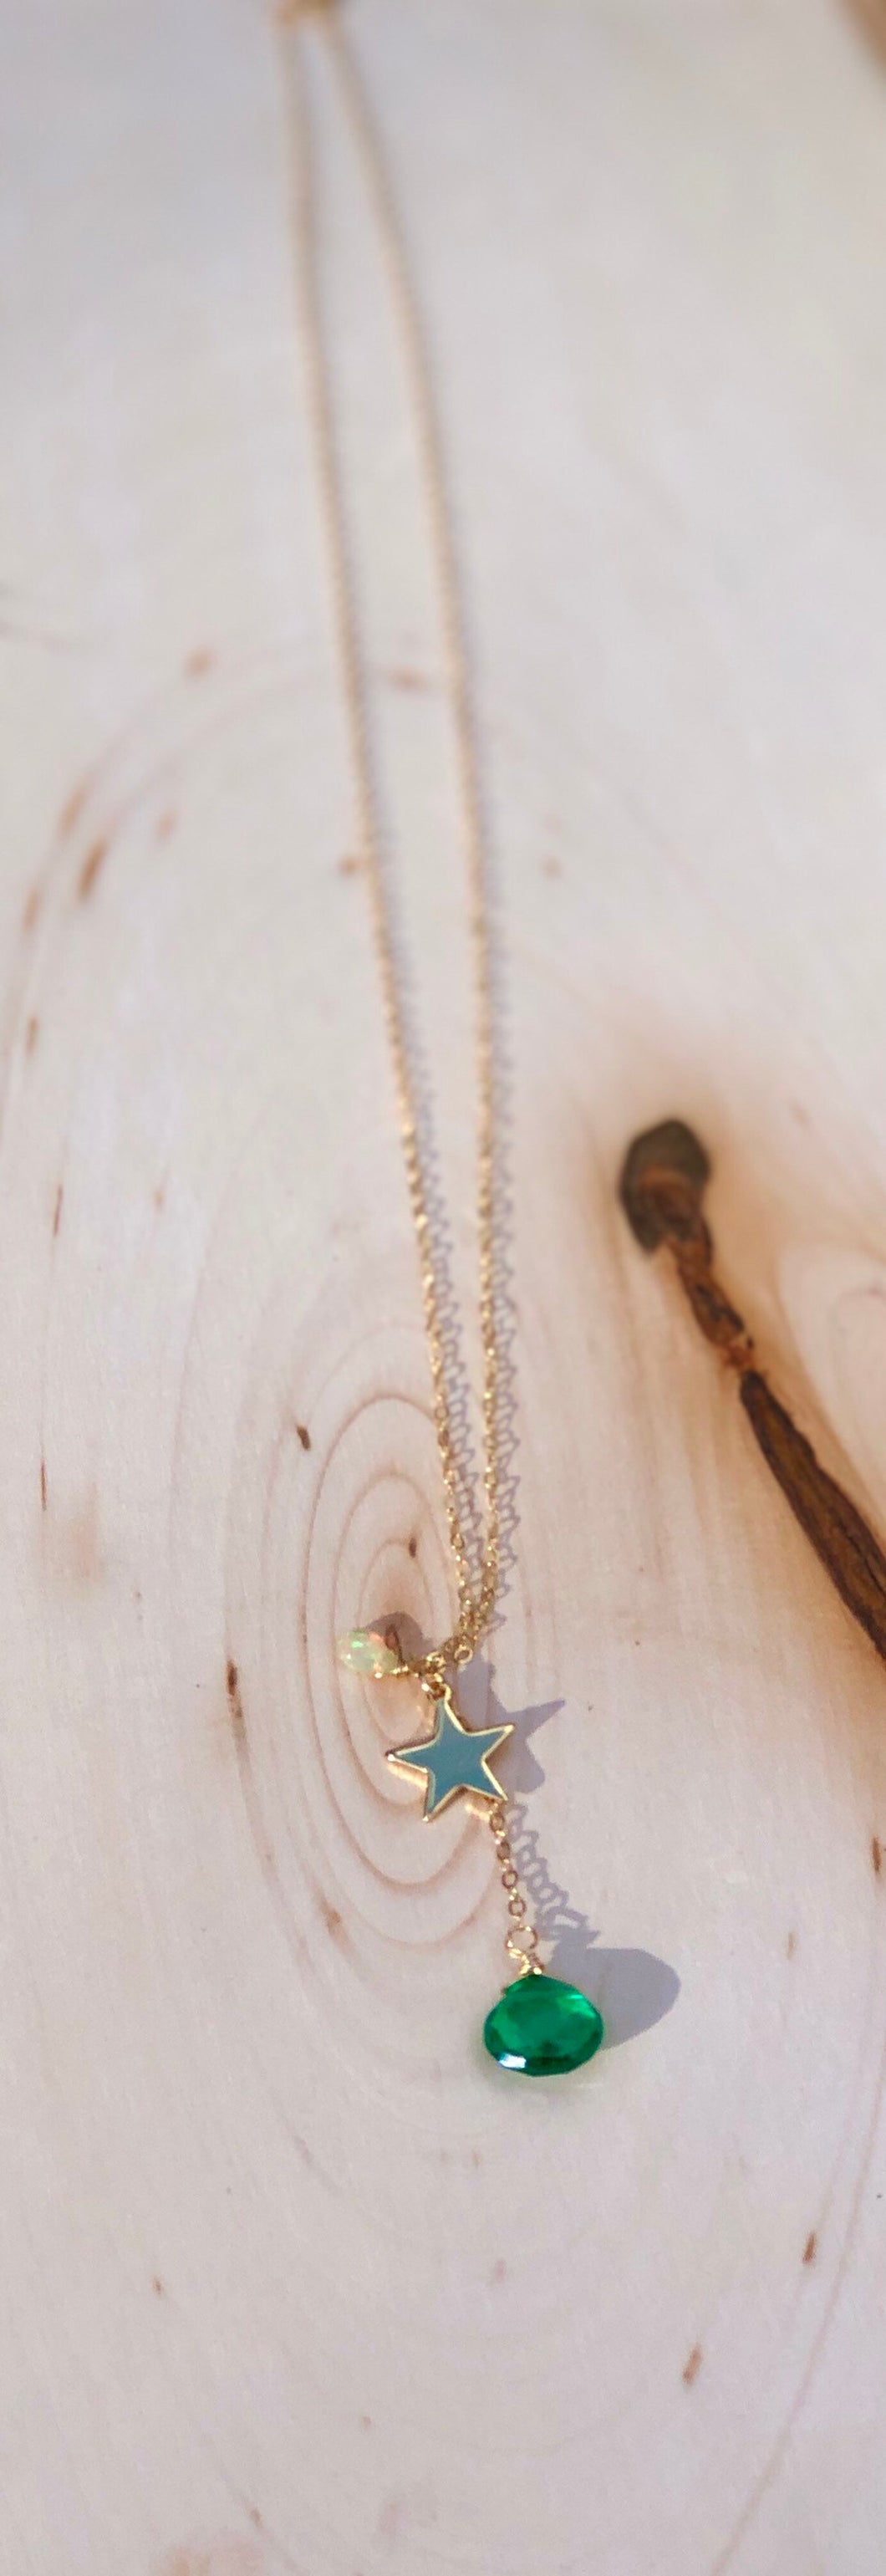 Green Amethyst and Opal Gold Star Charm Necklace